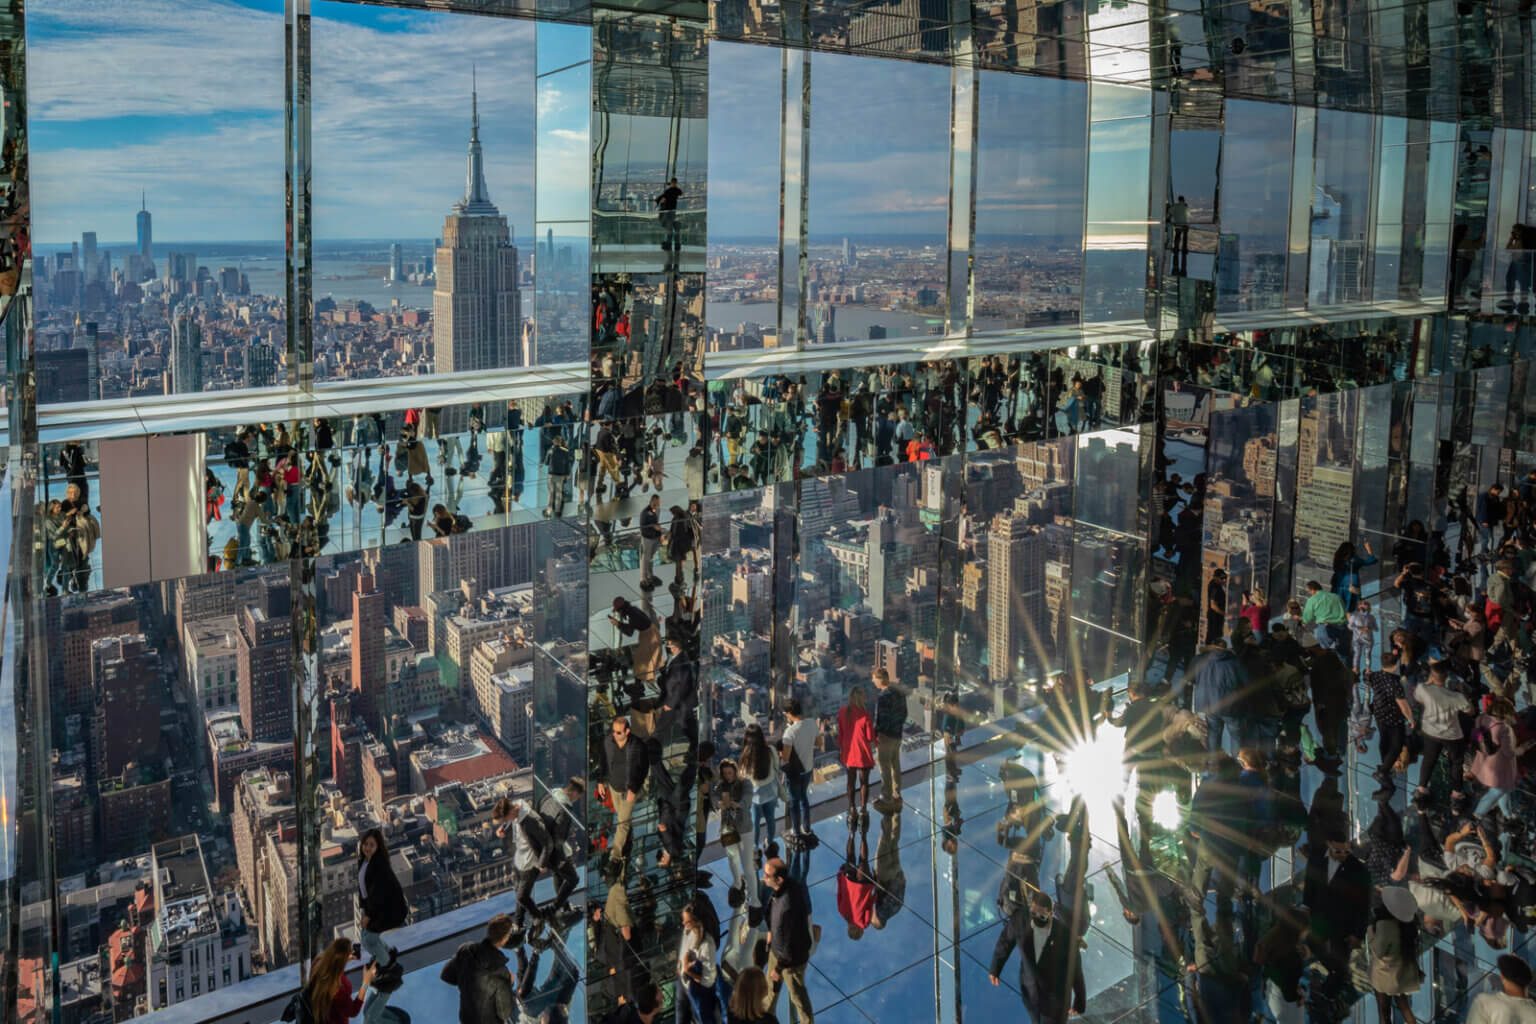 inside Summit One Vanderbilt observation deck and the reflections with the Empire State Building in Midtown NYC